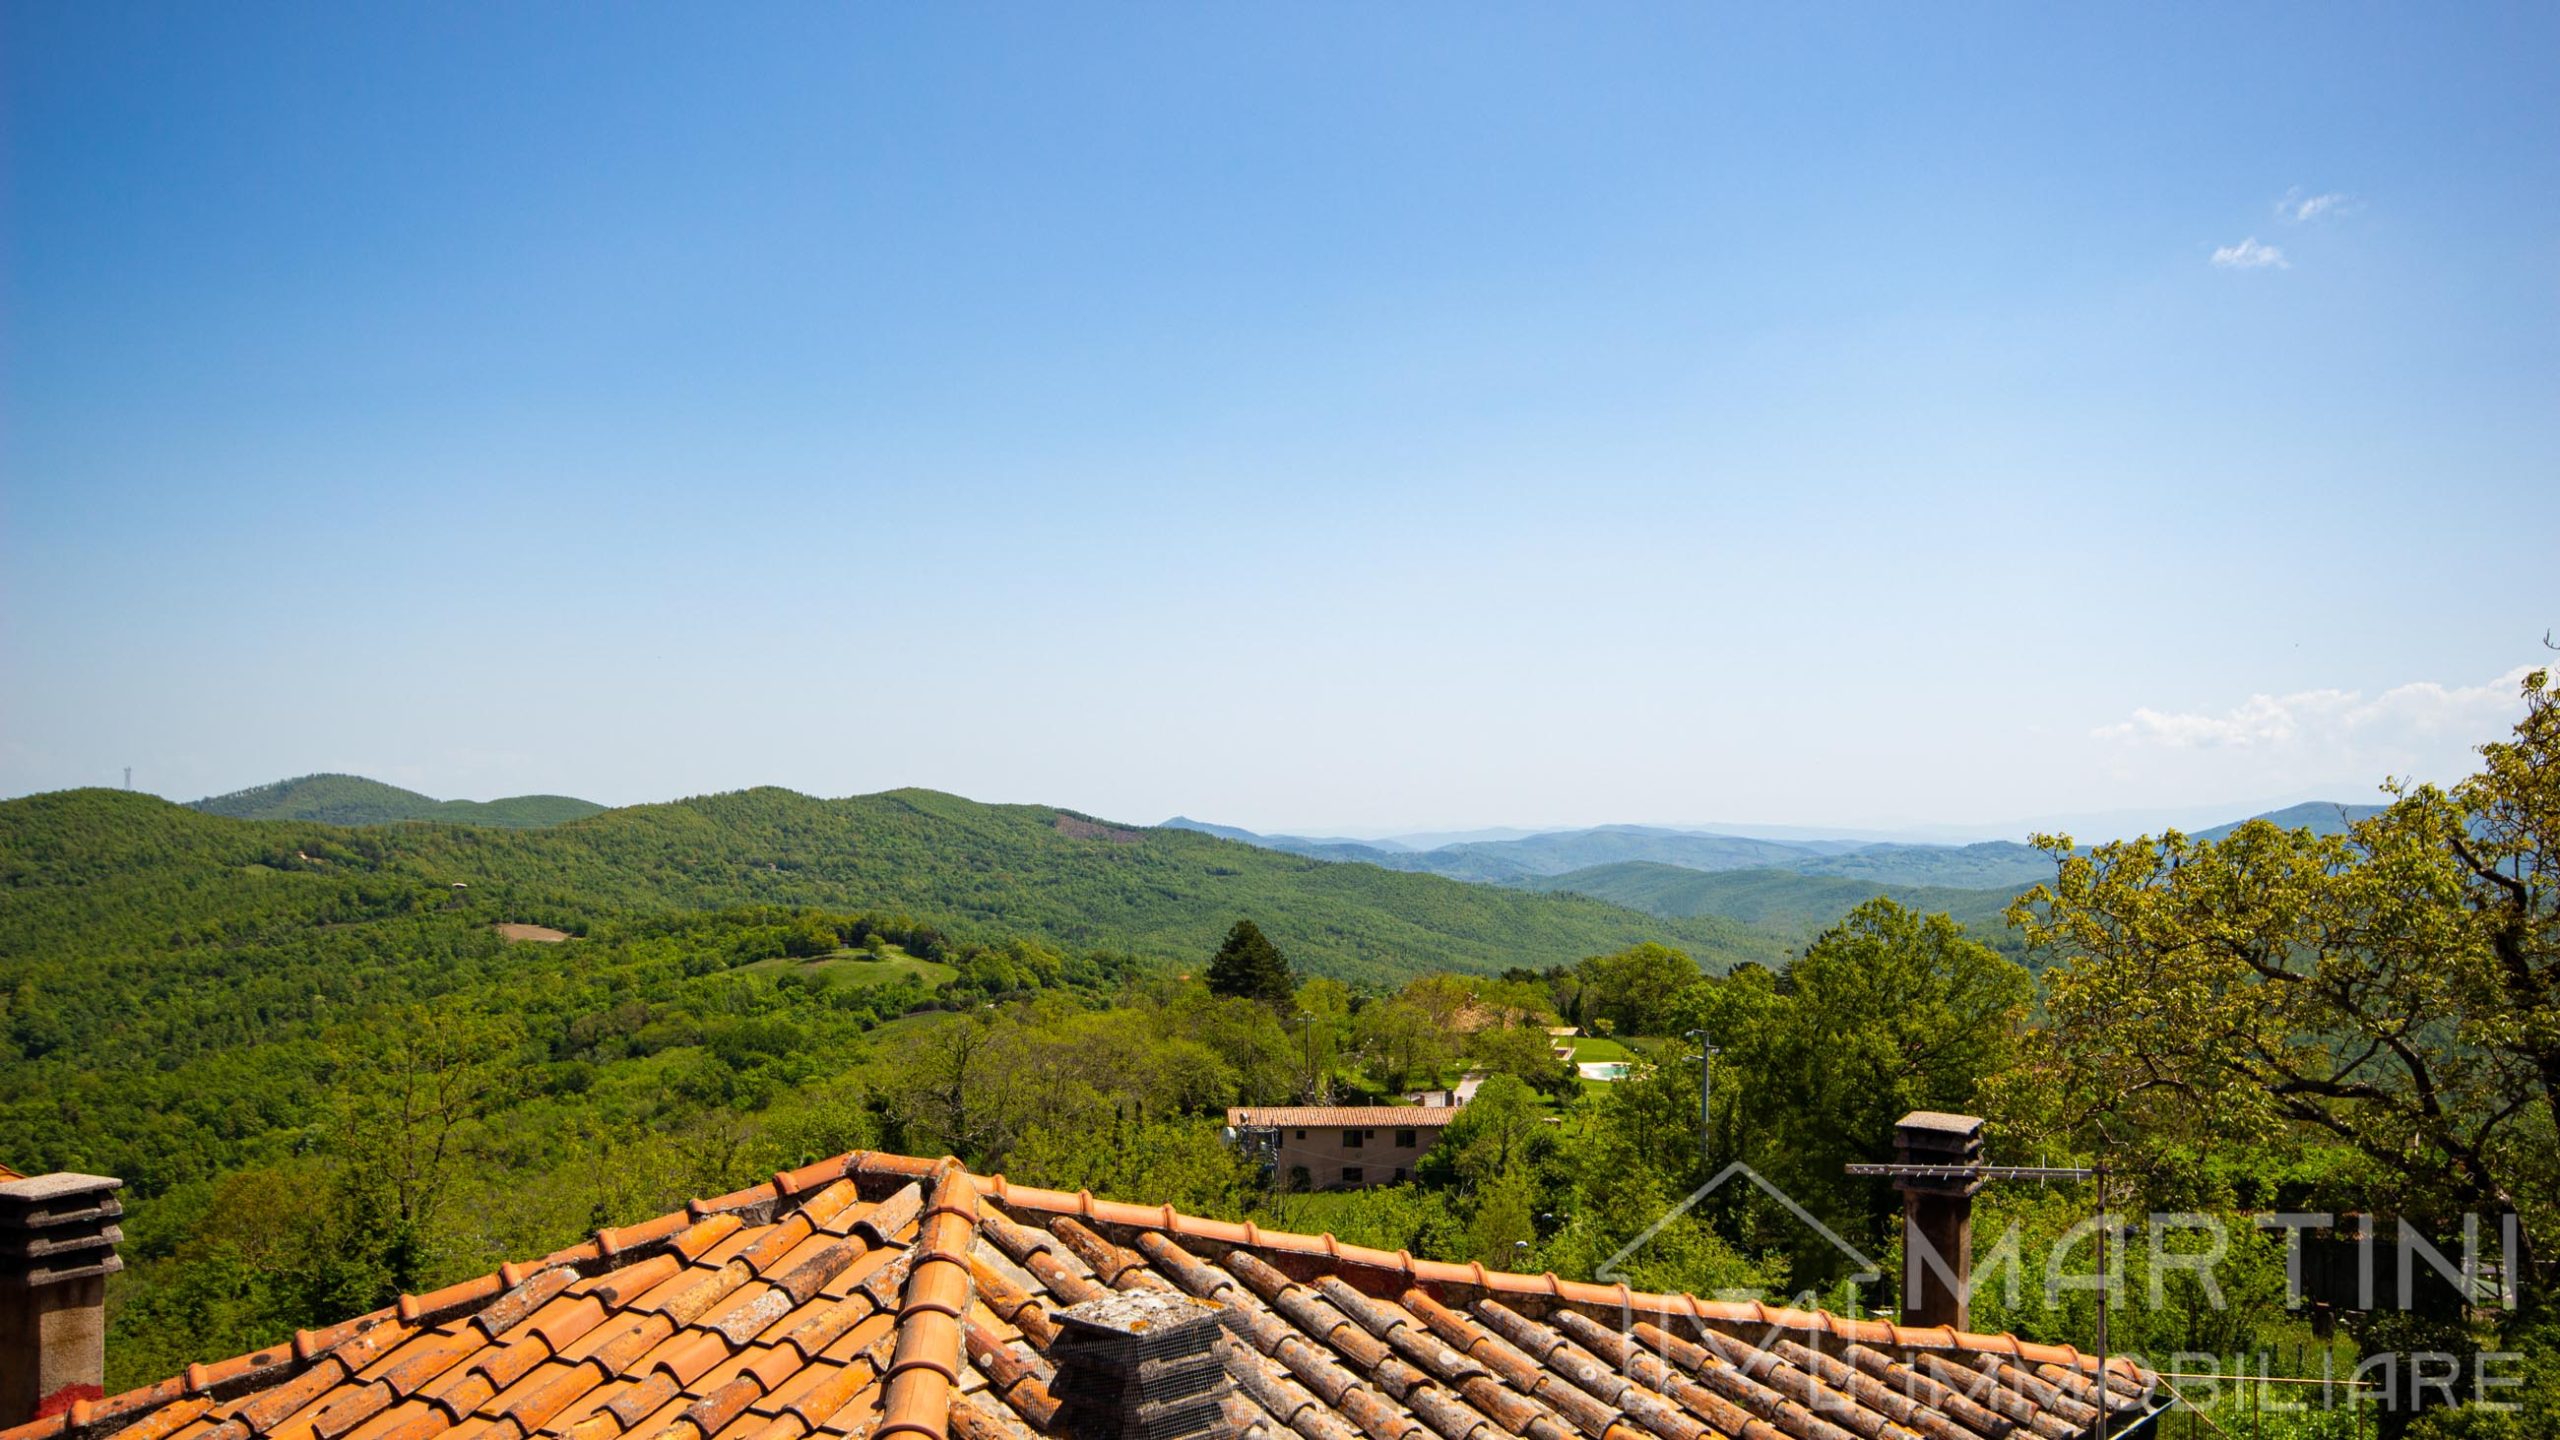 Semi-Detached House | Village in Tuscany